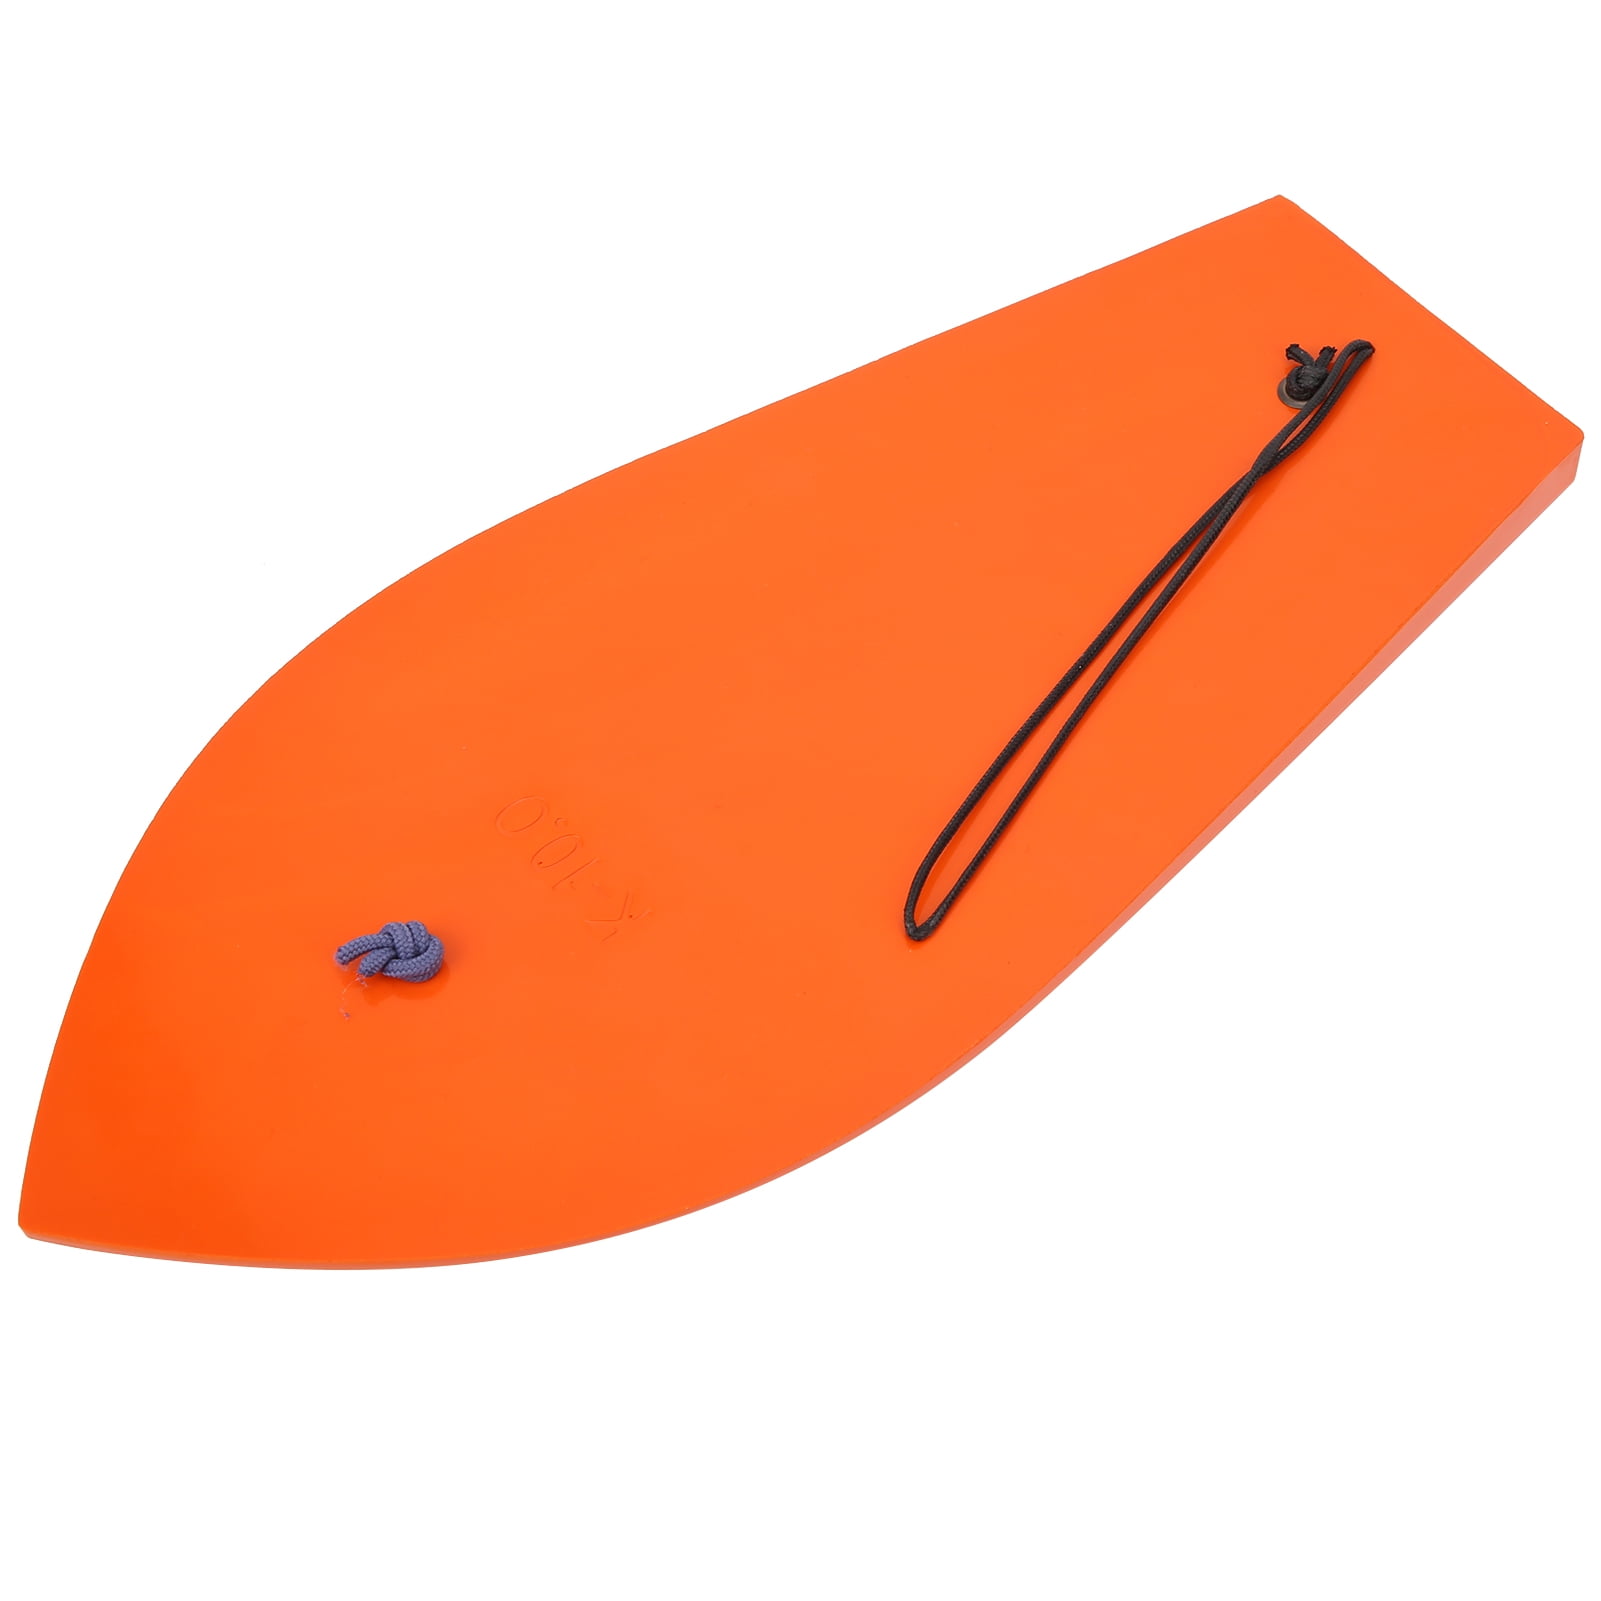 Accessories Fishing Trolling Board Fishing Trolling Diver New Durable.